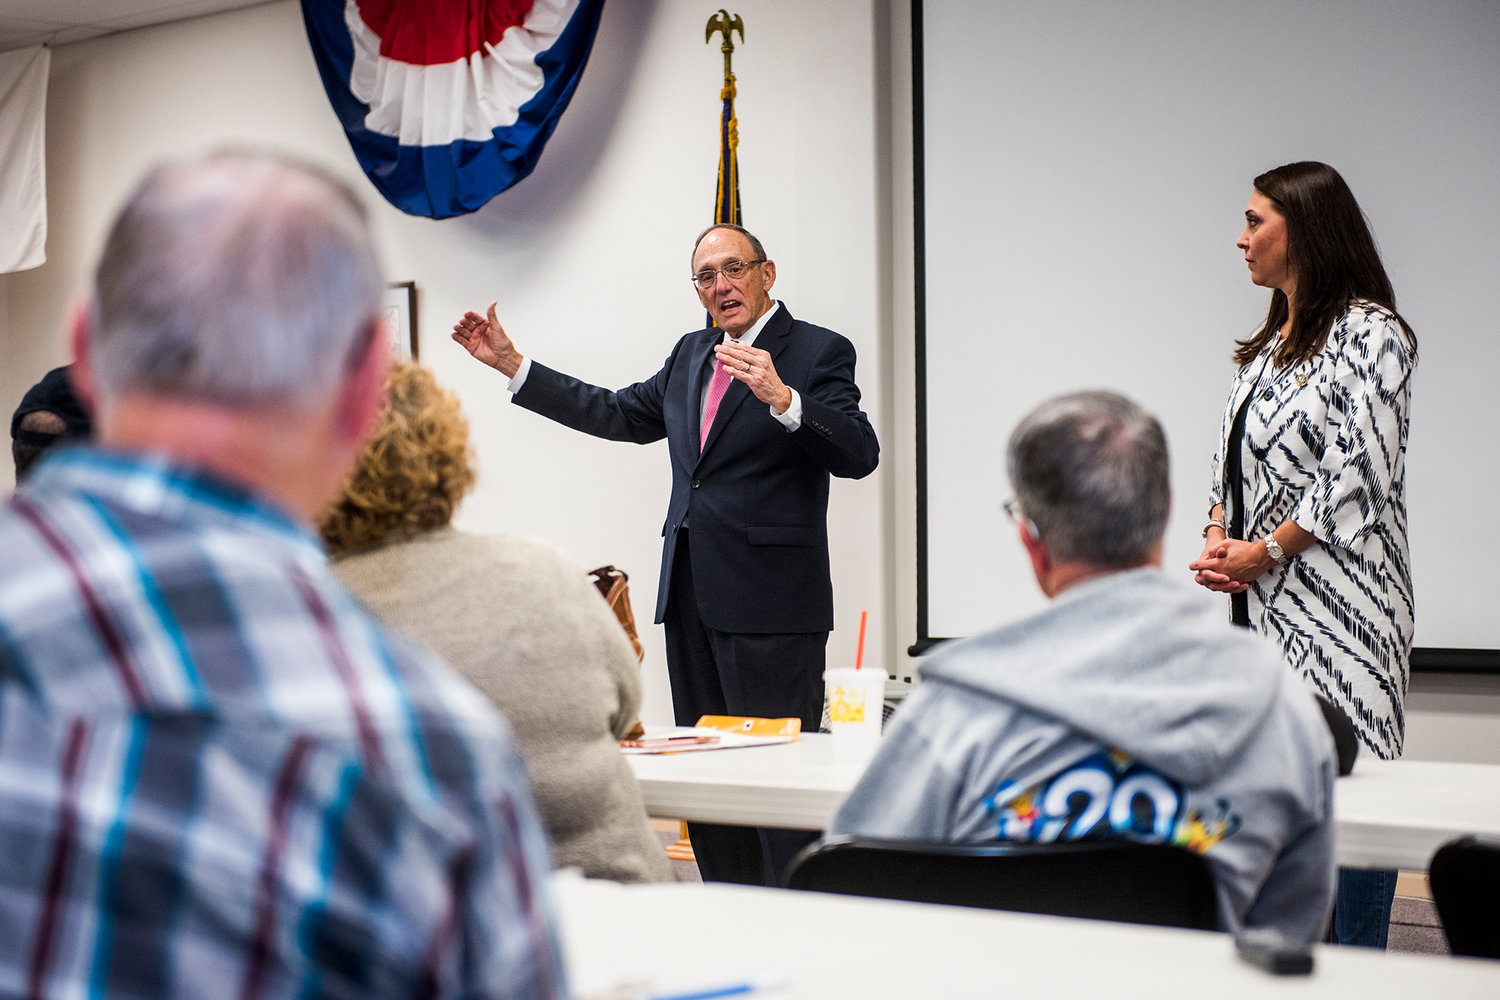 Rep. Phil Roe, center left, of Tennessee, and Rep. Jaime Herrera Beutler, far right, talk during a public meeting Monday afternoon at the Chehalis Veterans Memorial Museum.